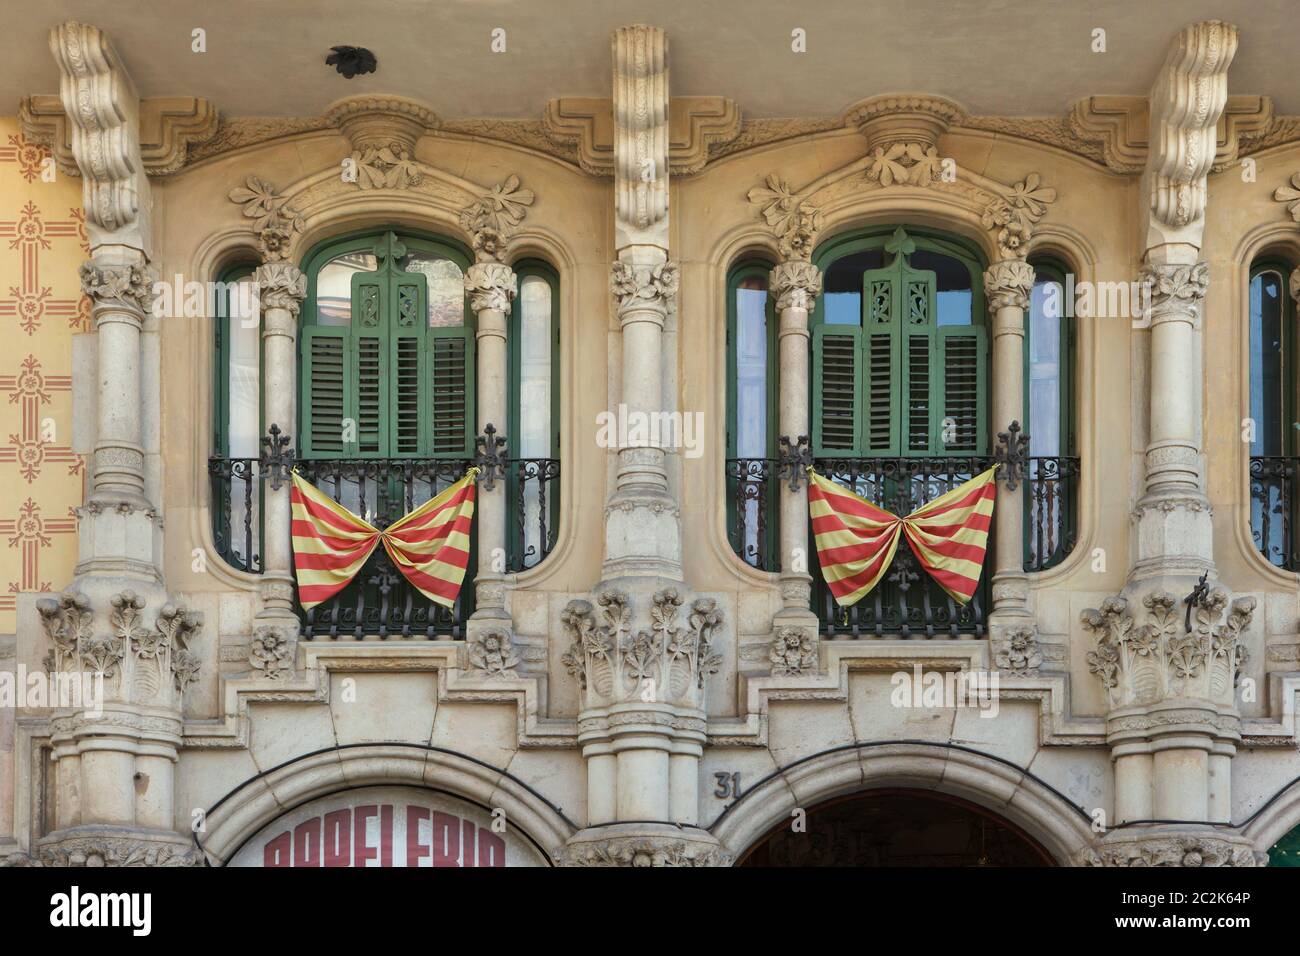 Catalan national flags placed on the French balconies on the Cases Ramos in Barcelona, Catalonia, Spain. The building designed by Catalan modernist architect Jaume Torres i Grau was constructed between 1906 and 1908 on Plaça de Lesseps (Plaza de Lesseps). Stock Photo